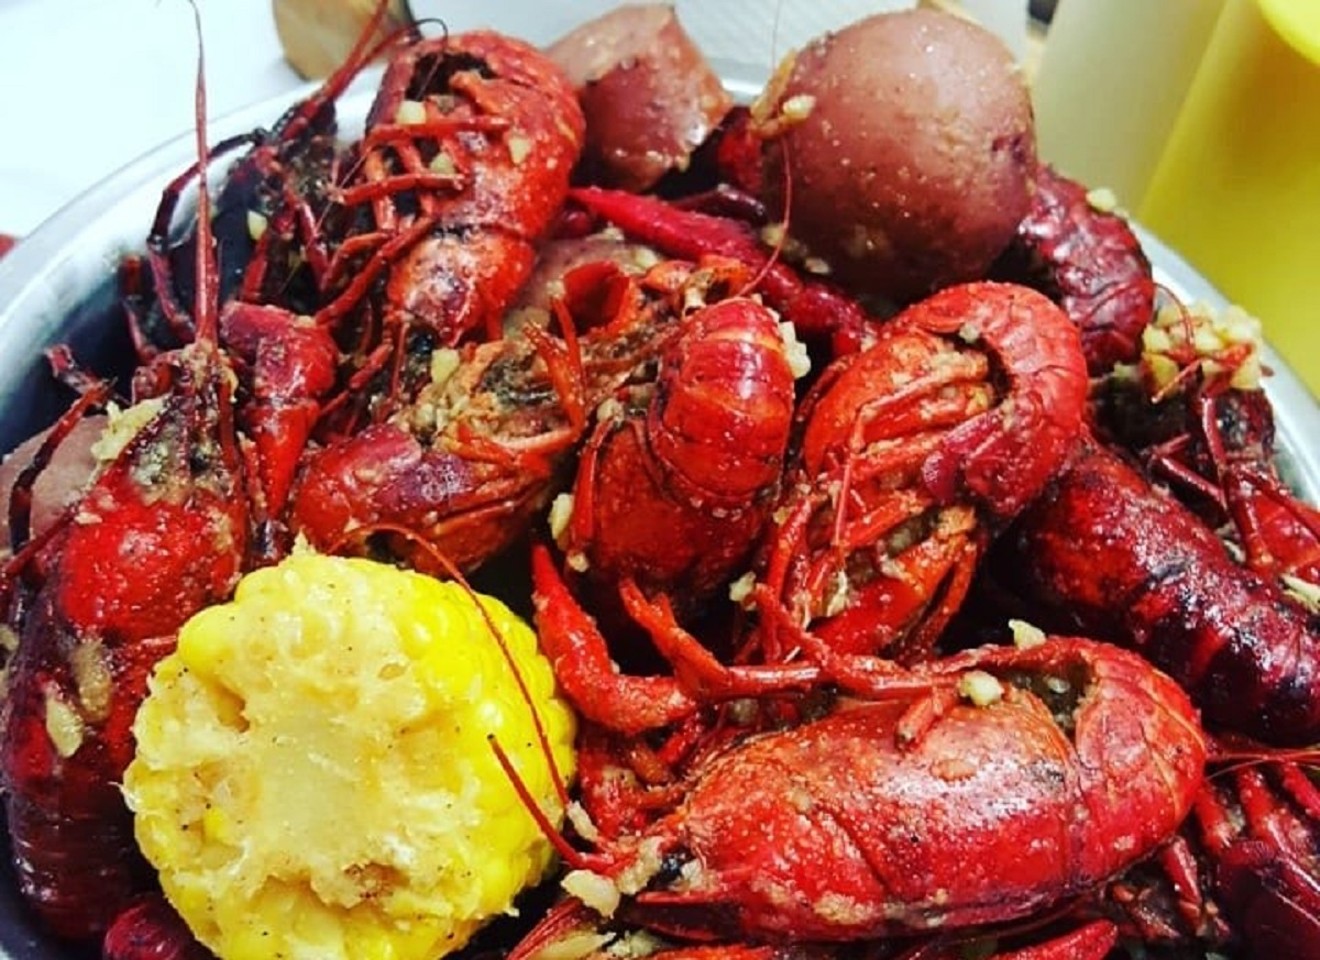 "Consistency is important and Crawfish Cafe is always a hit," according to chef Shannen Tune.